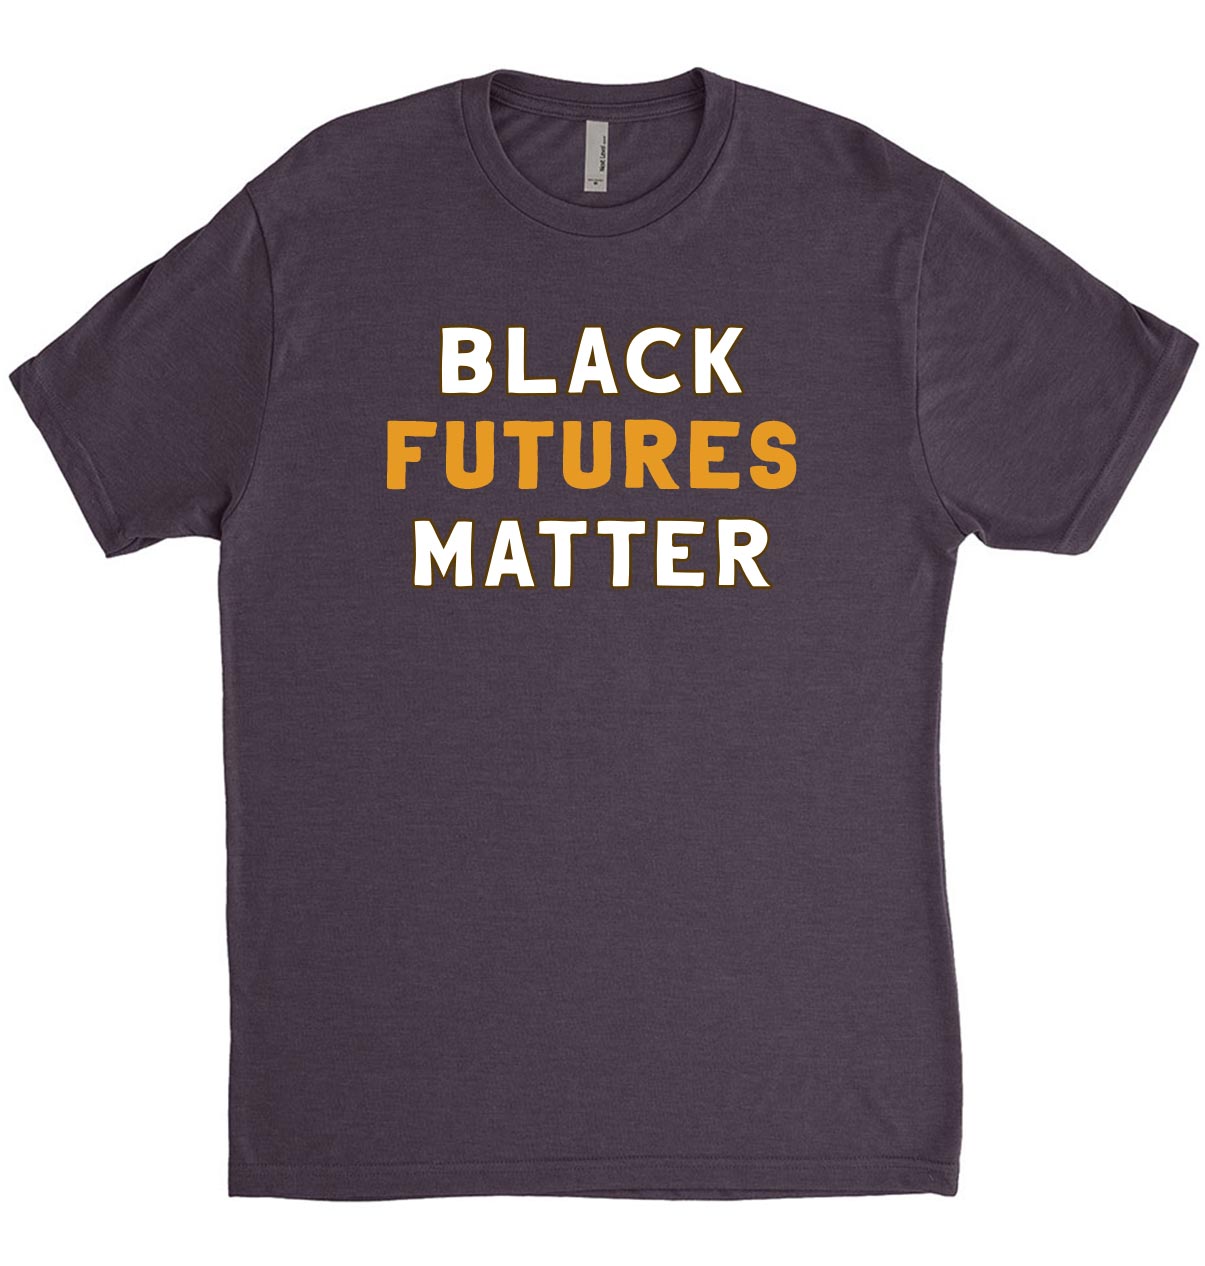 BLACK FUTURES MATTER  NEXT LEVEL UNISEX TRIBLEND TEE  classic fit - humanKIND shop with a purpose